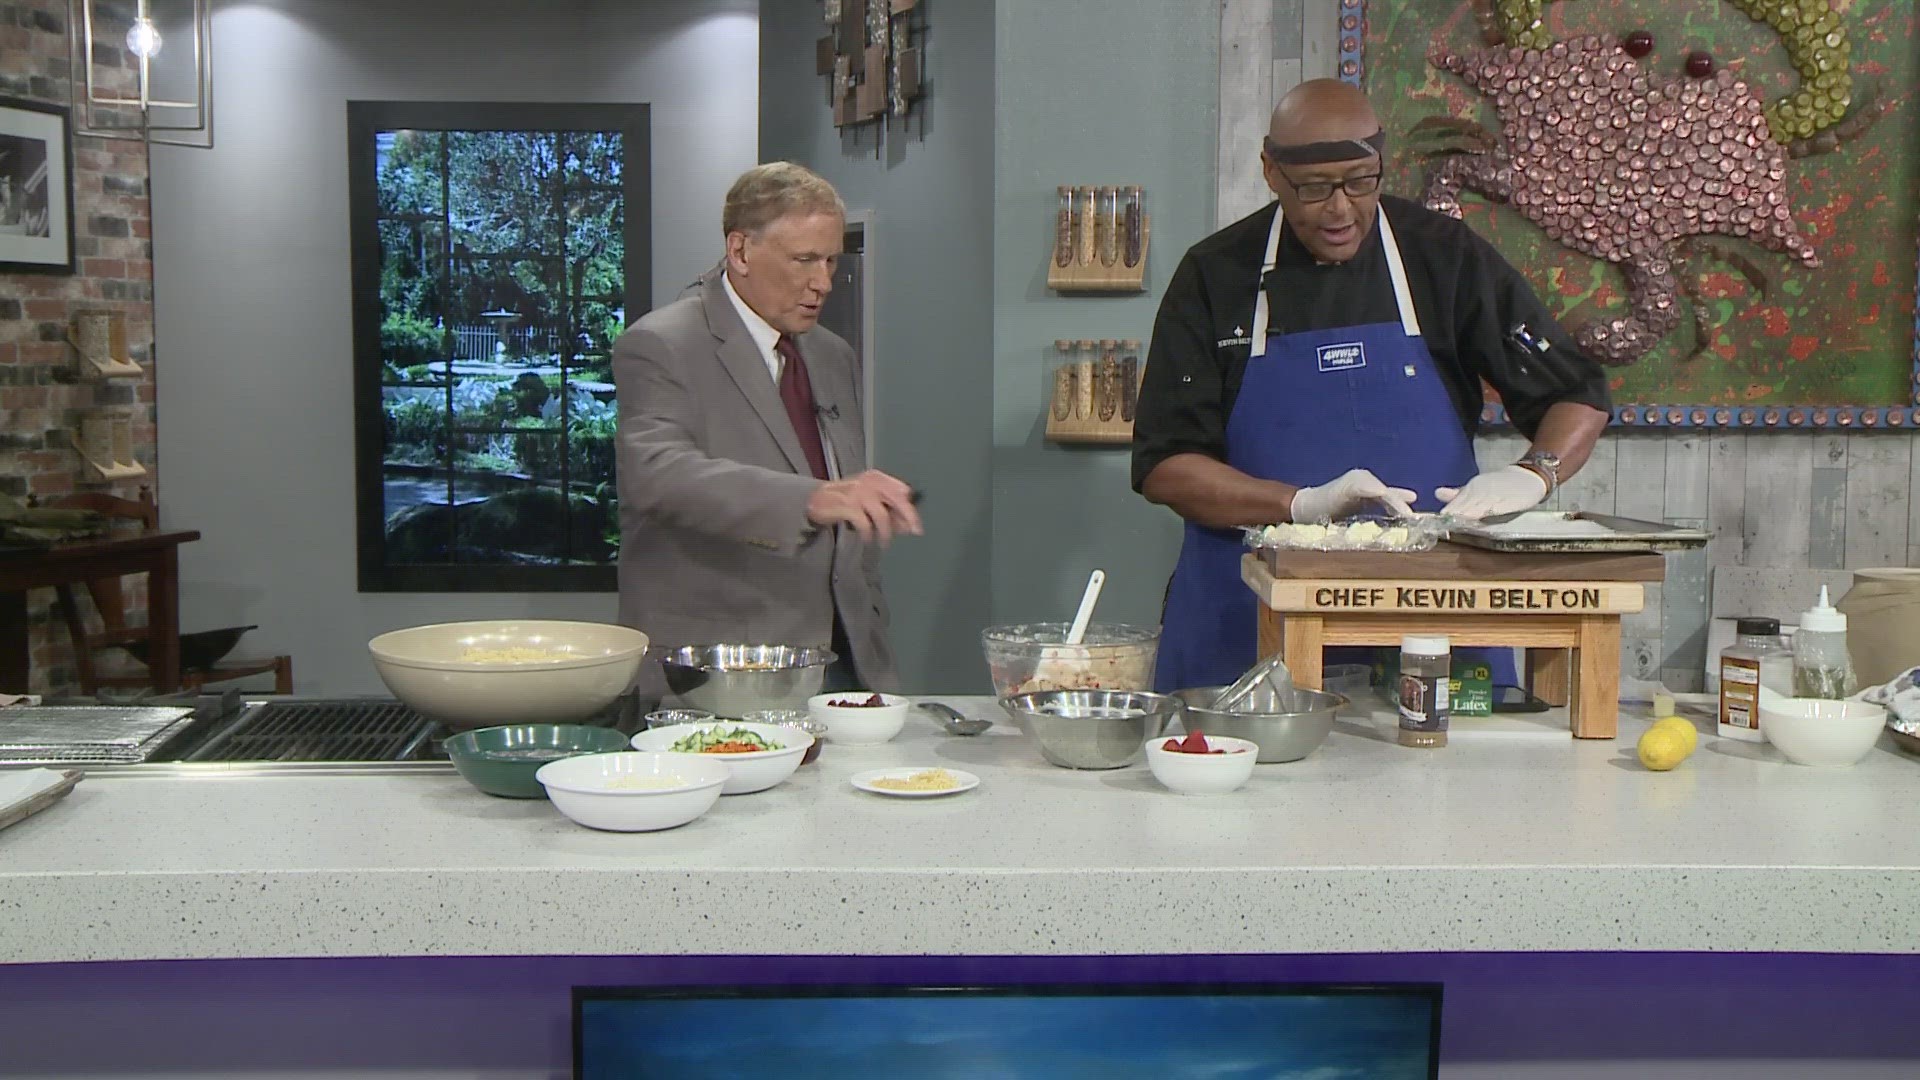 Chef Kevin Belton cooks up a Summertime Orzo Salad.